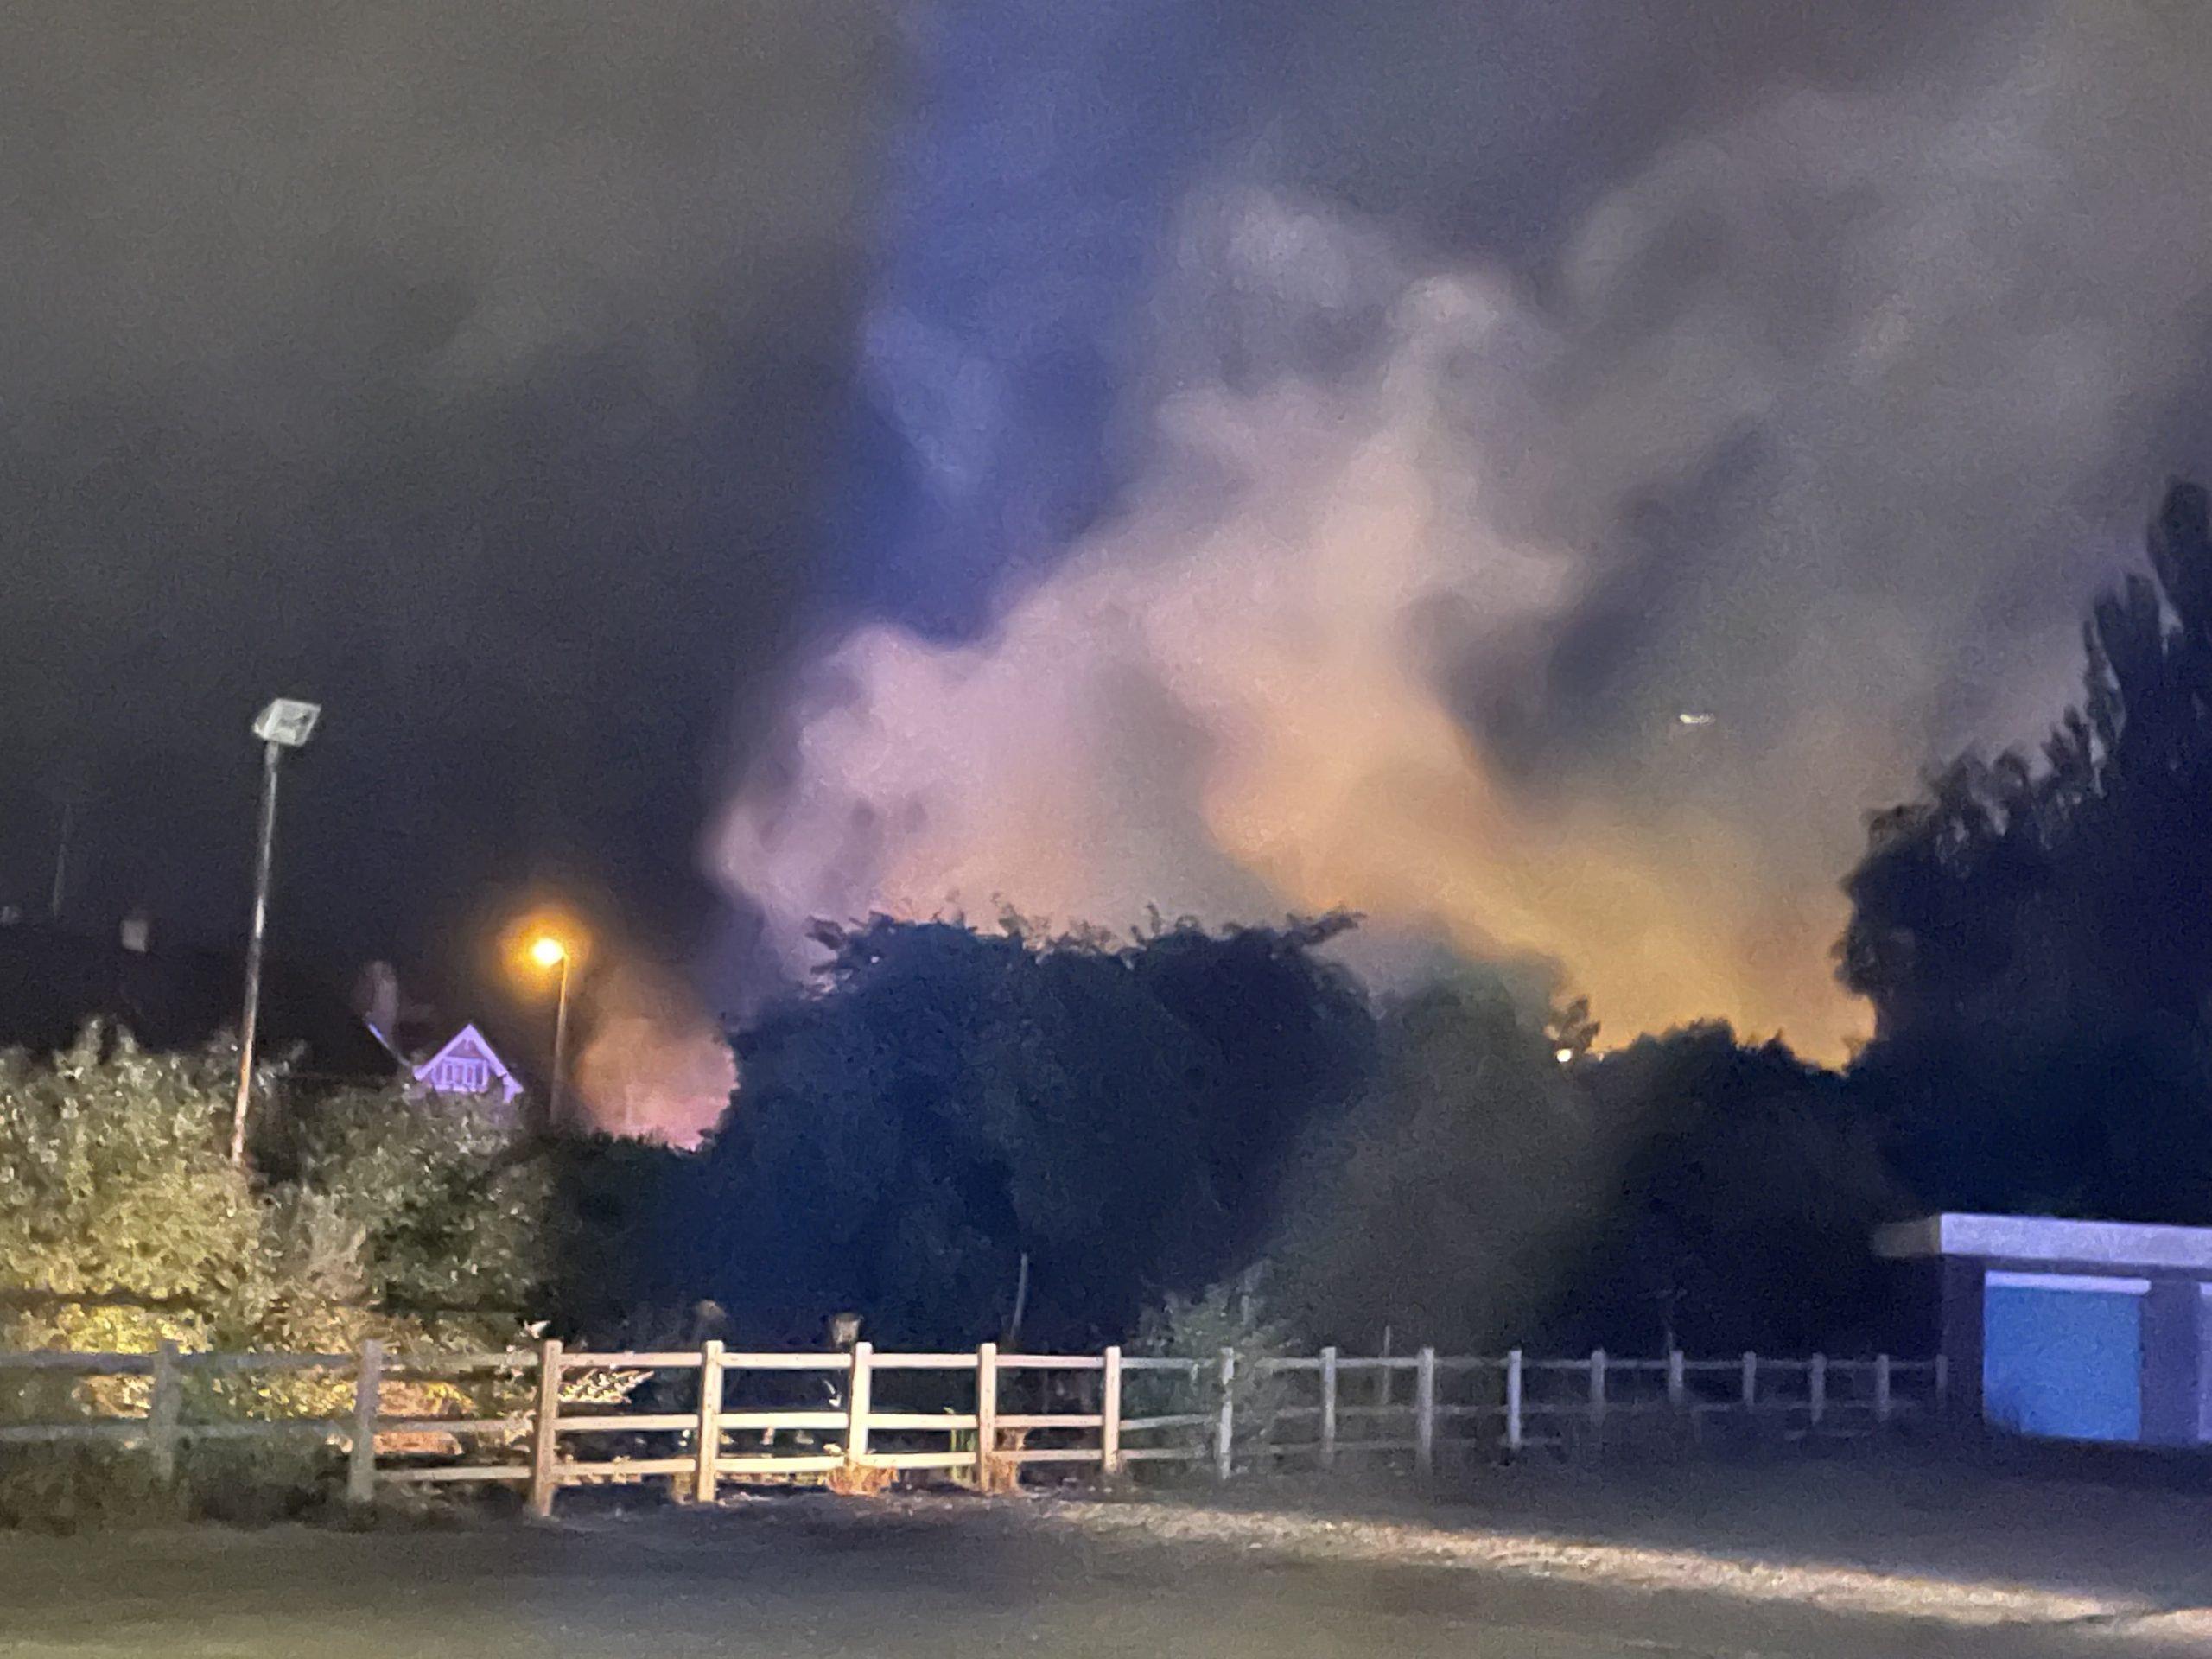 NEWS | Emergency services are responding to a fire in Hereford tonight